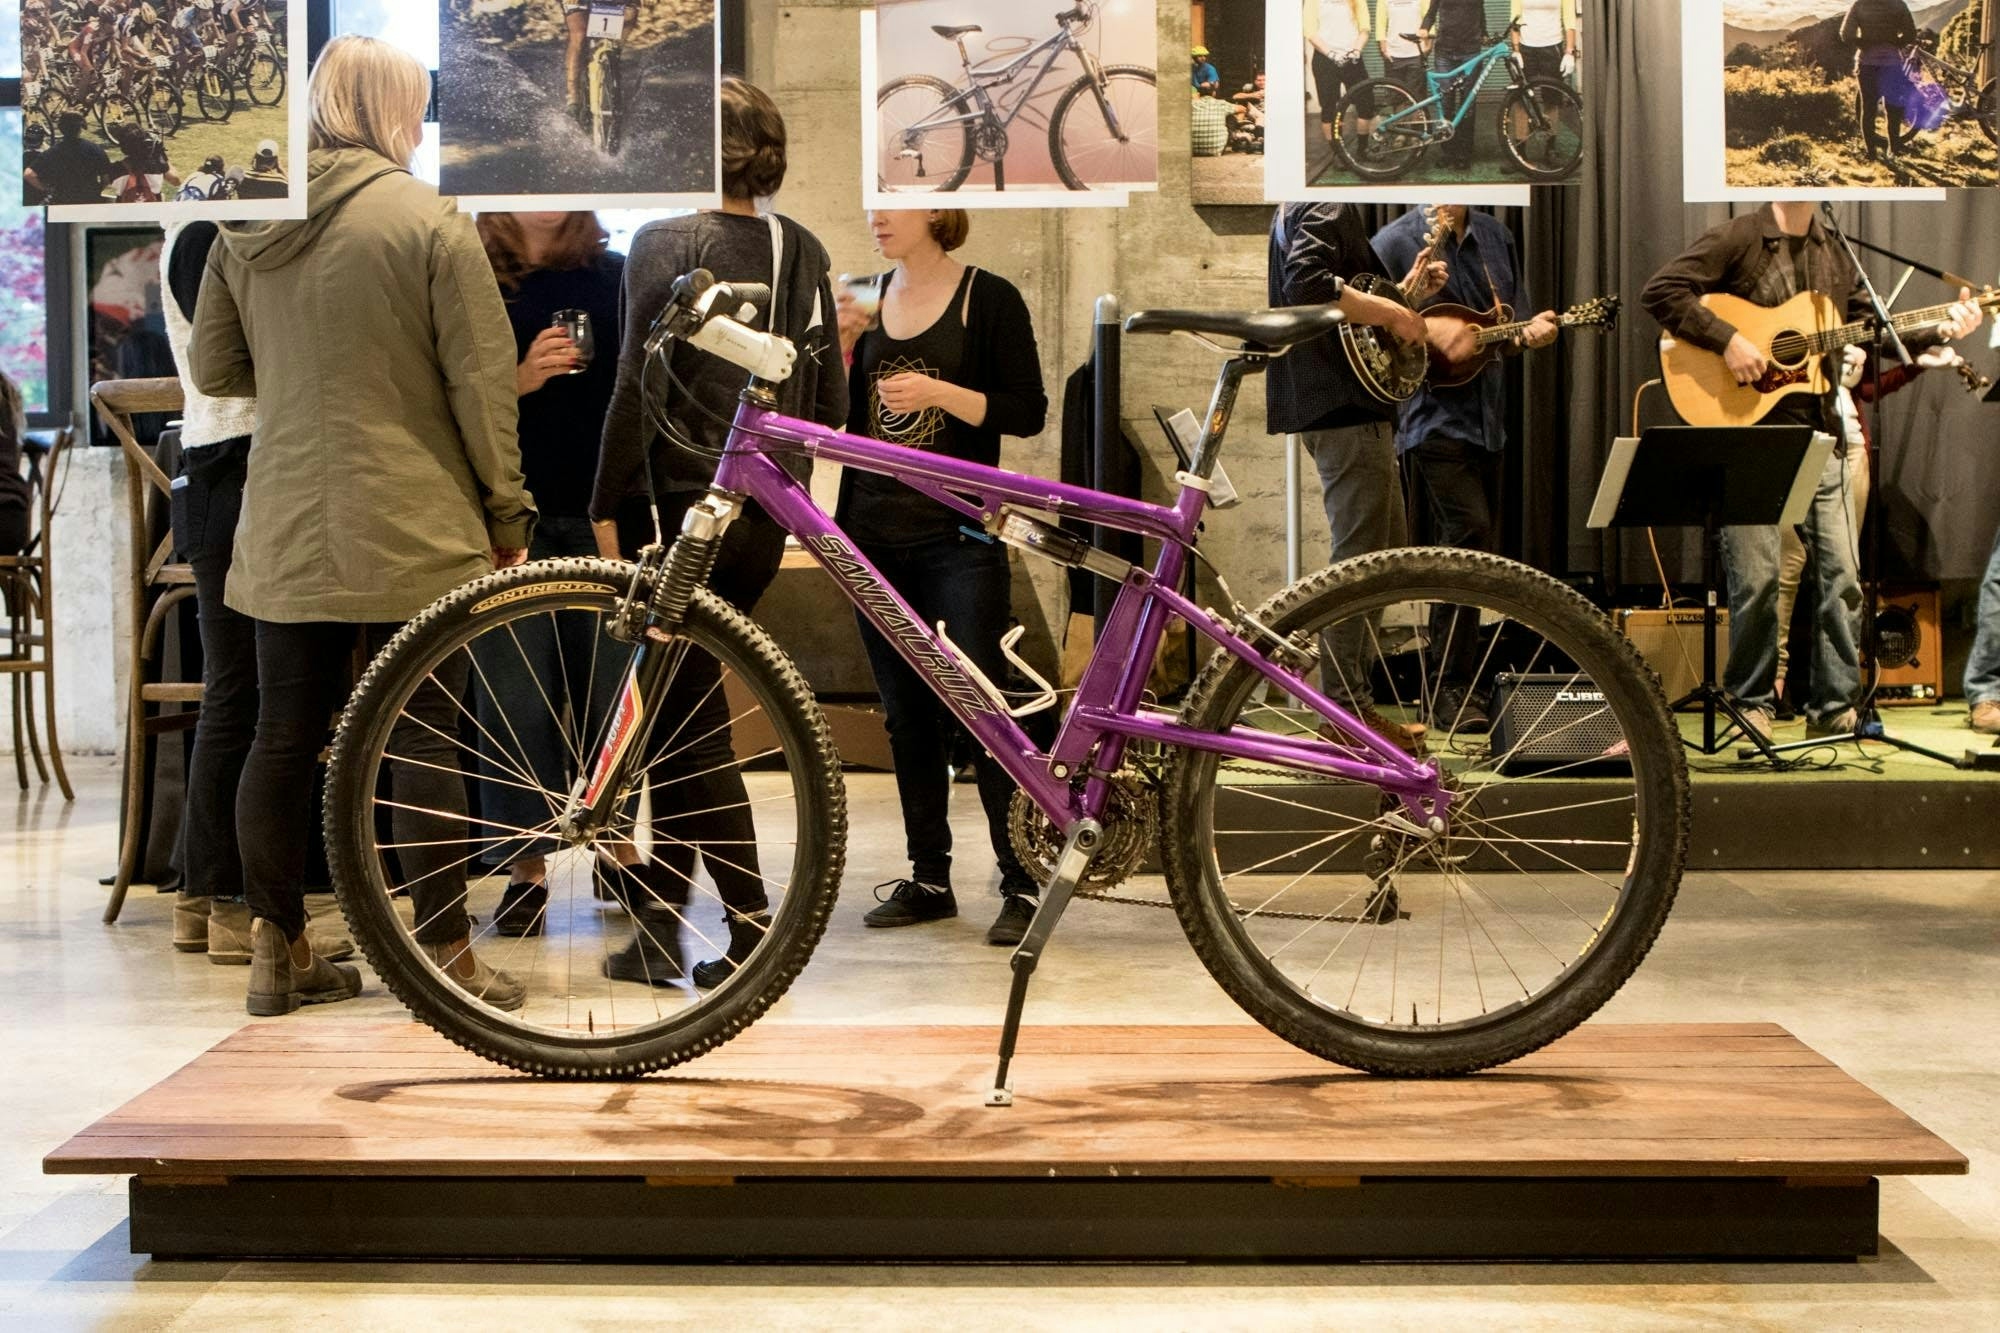 An older Santa Cruz Mountain Bike - Purple frame on a wood platform in a showroom with people in the background